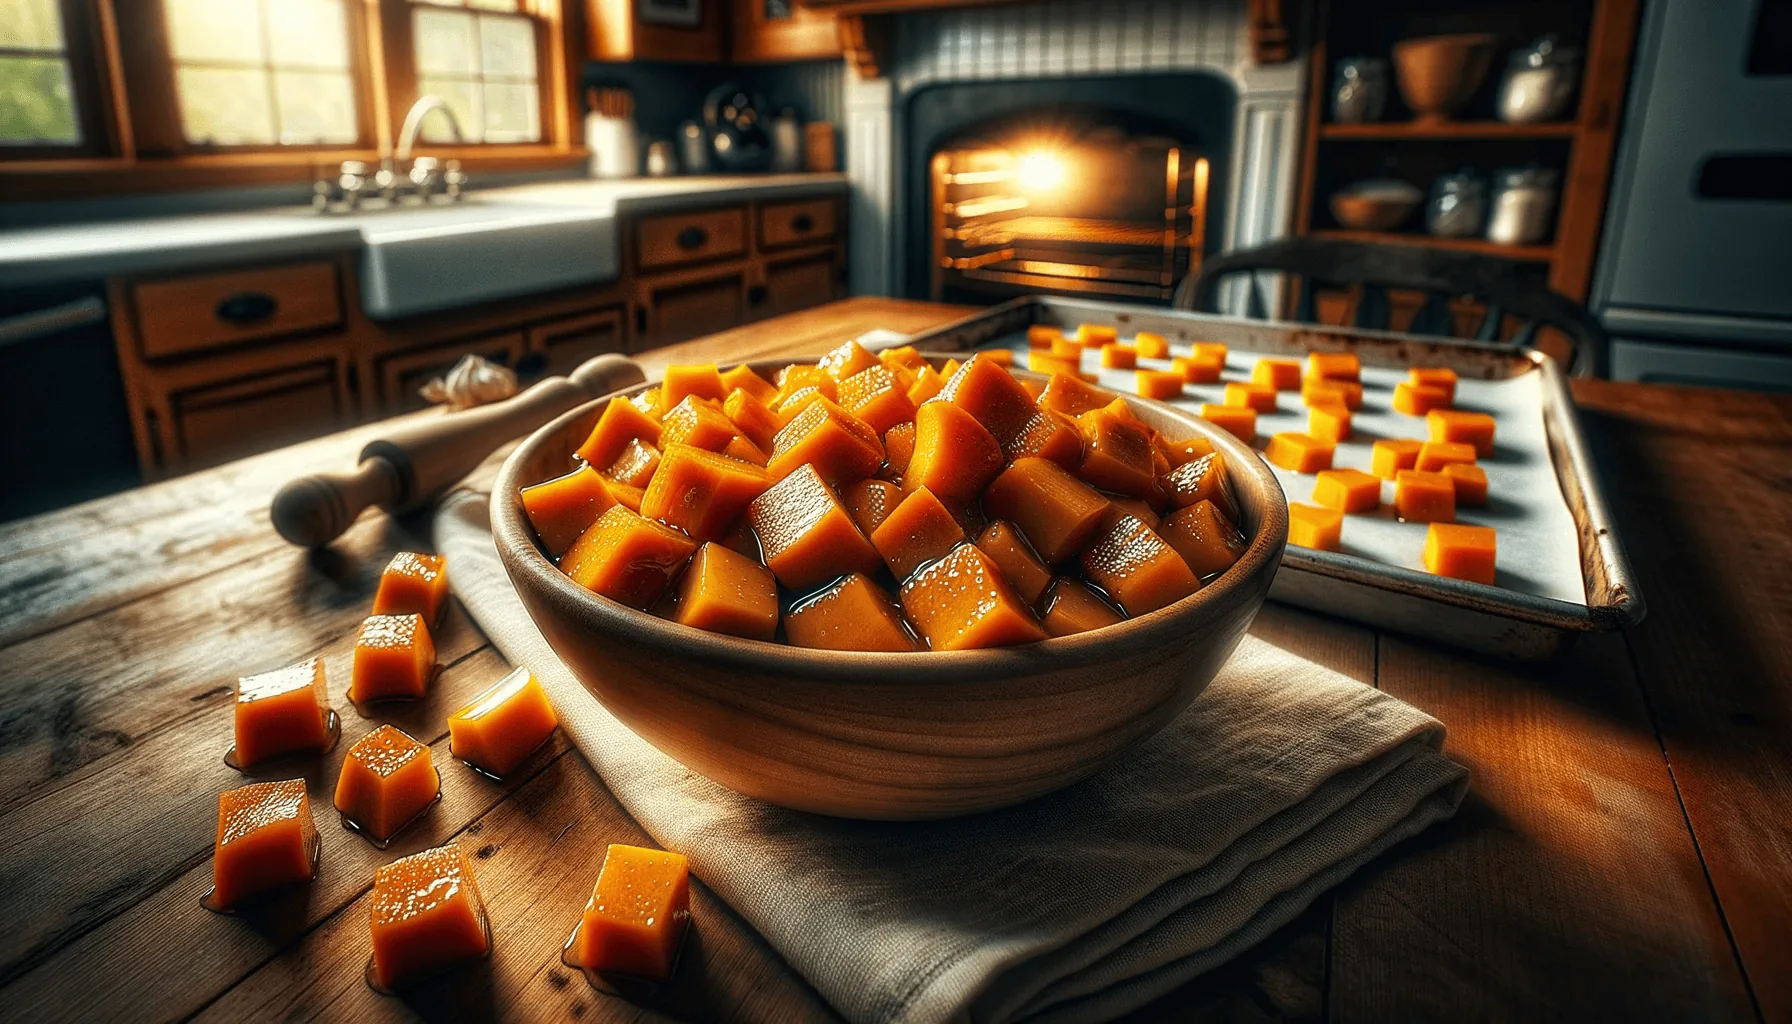 The making of maple-roasted butternut squash